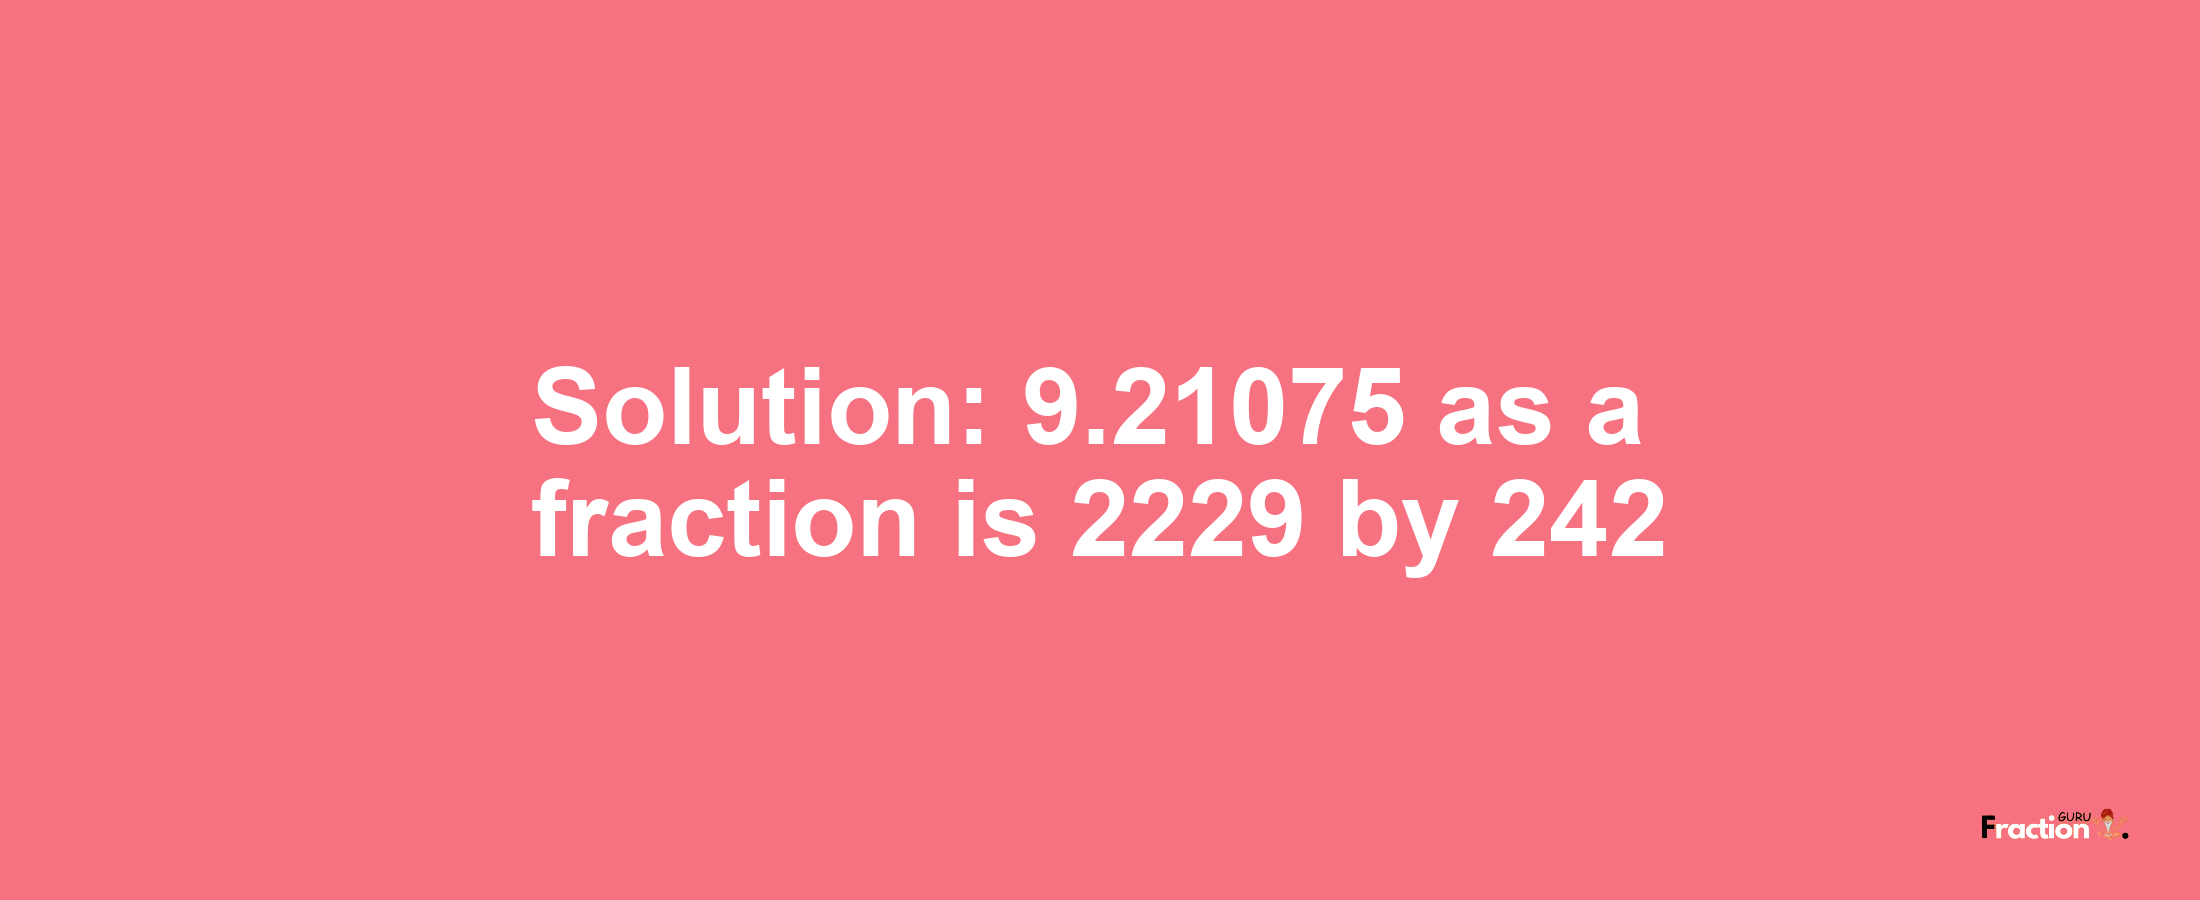 Solution:9.21075 as a fraction is 2229/242